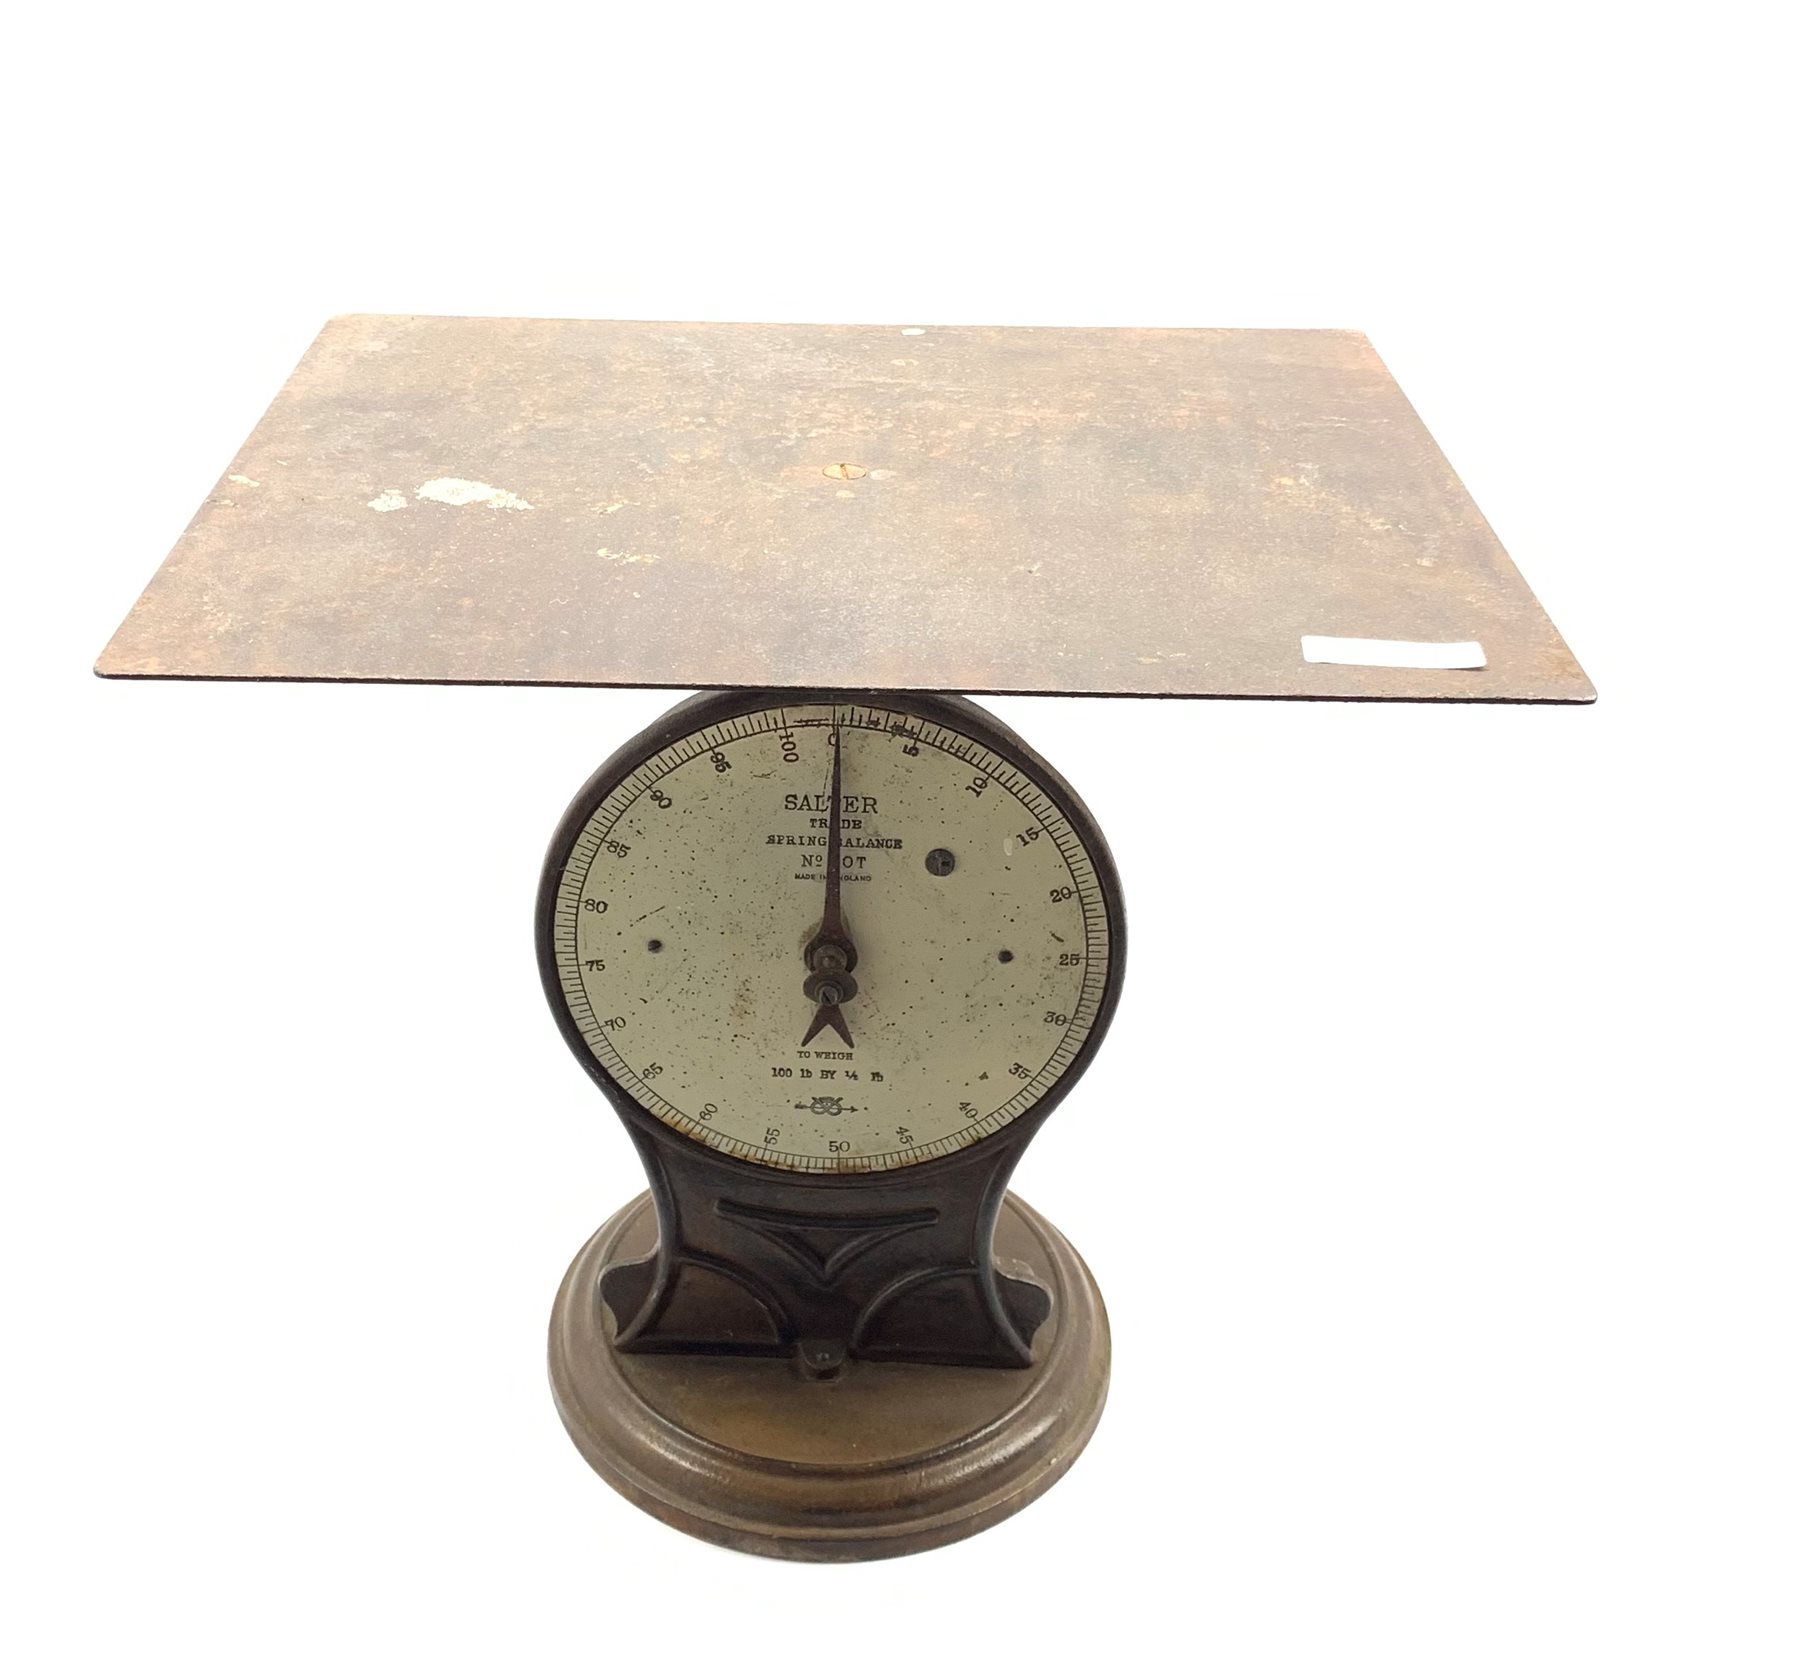 Salter spring balance cast iron trade scales, no.50T, to weigh 100lbs x 1/2lb, H45cm - Image 2 of 2